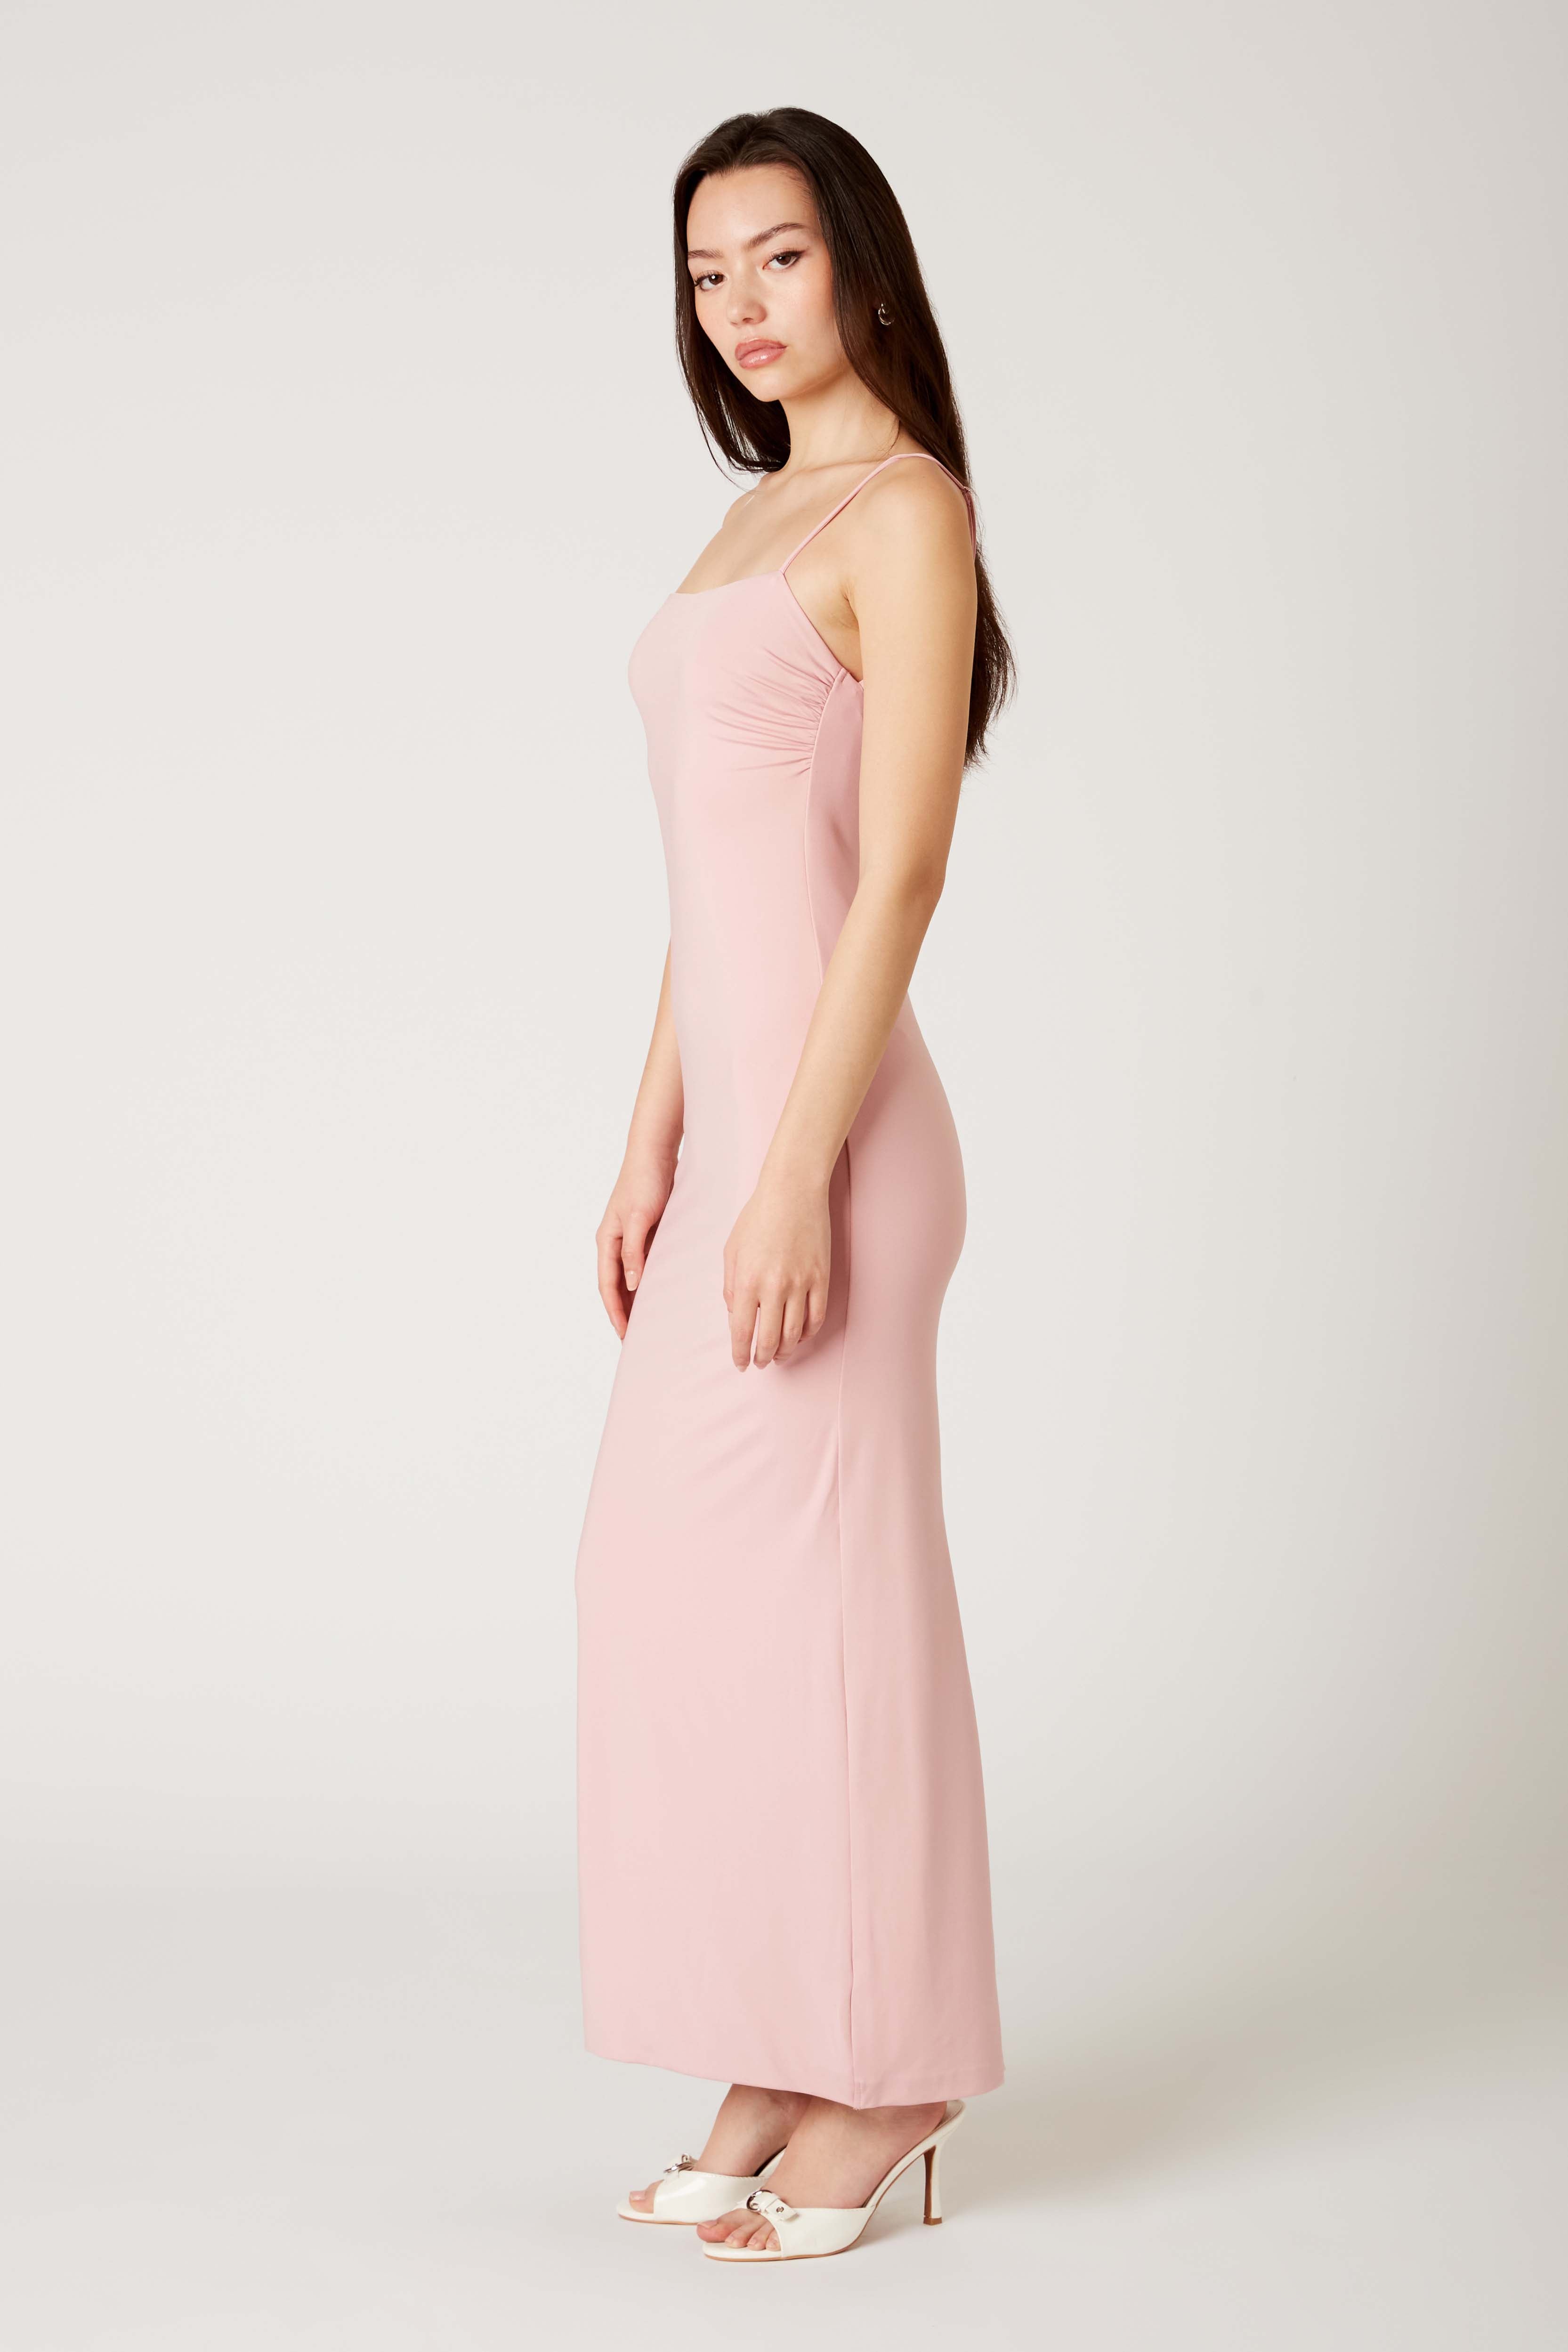 Knit Maxi Dress in cameo pink side view